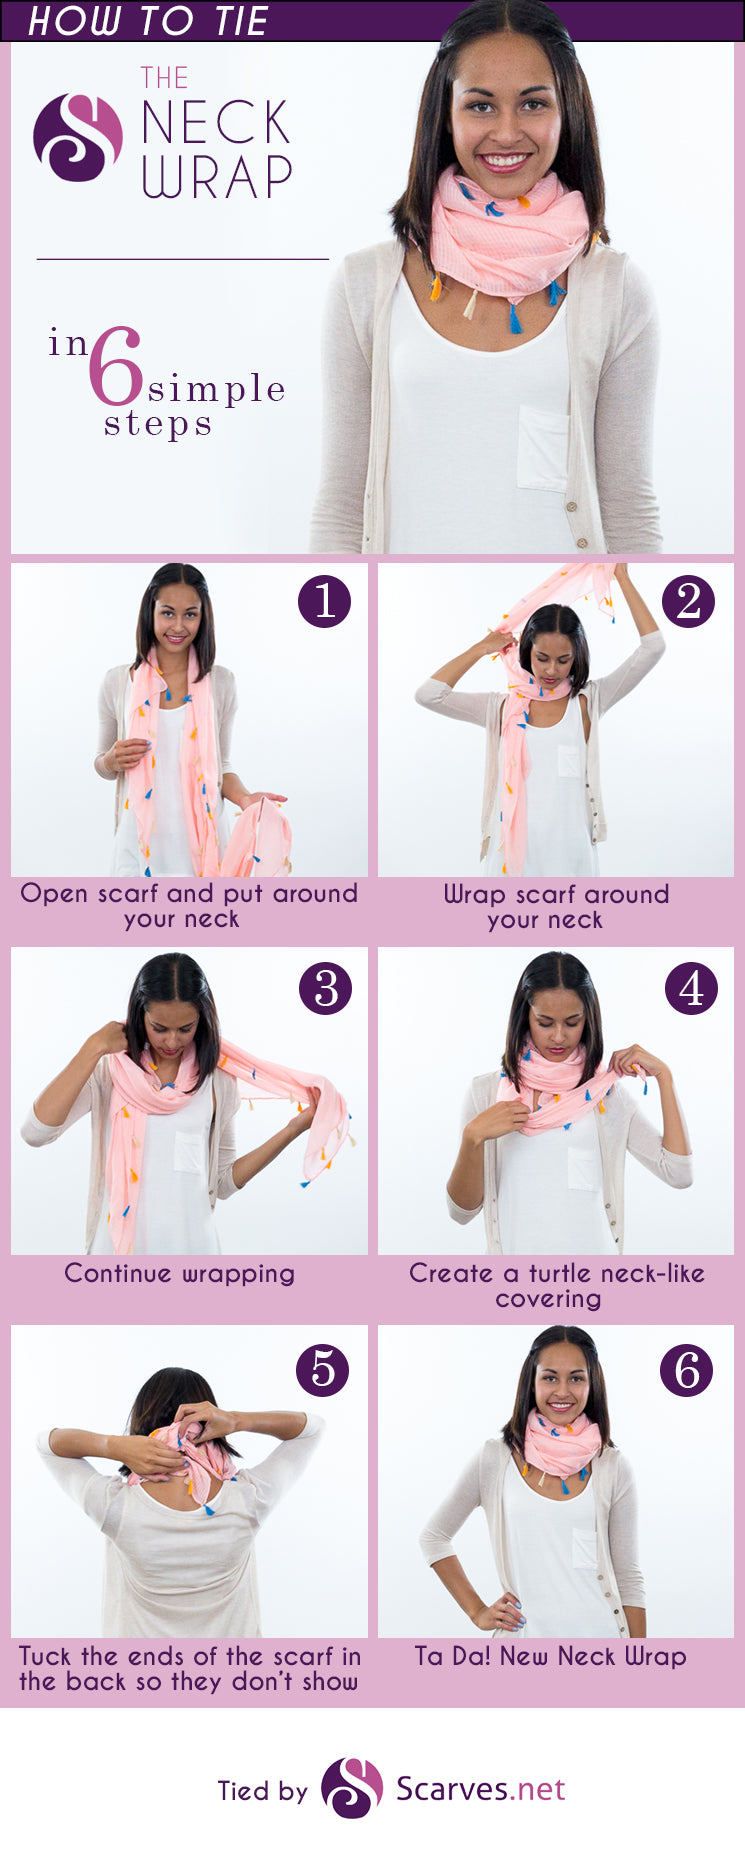 How to tie the neck wrap - step by step